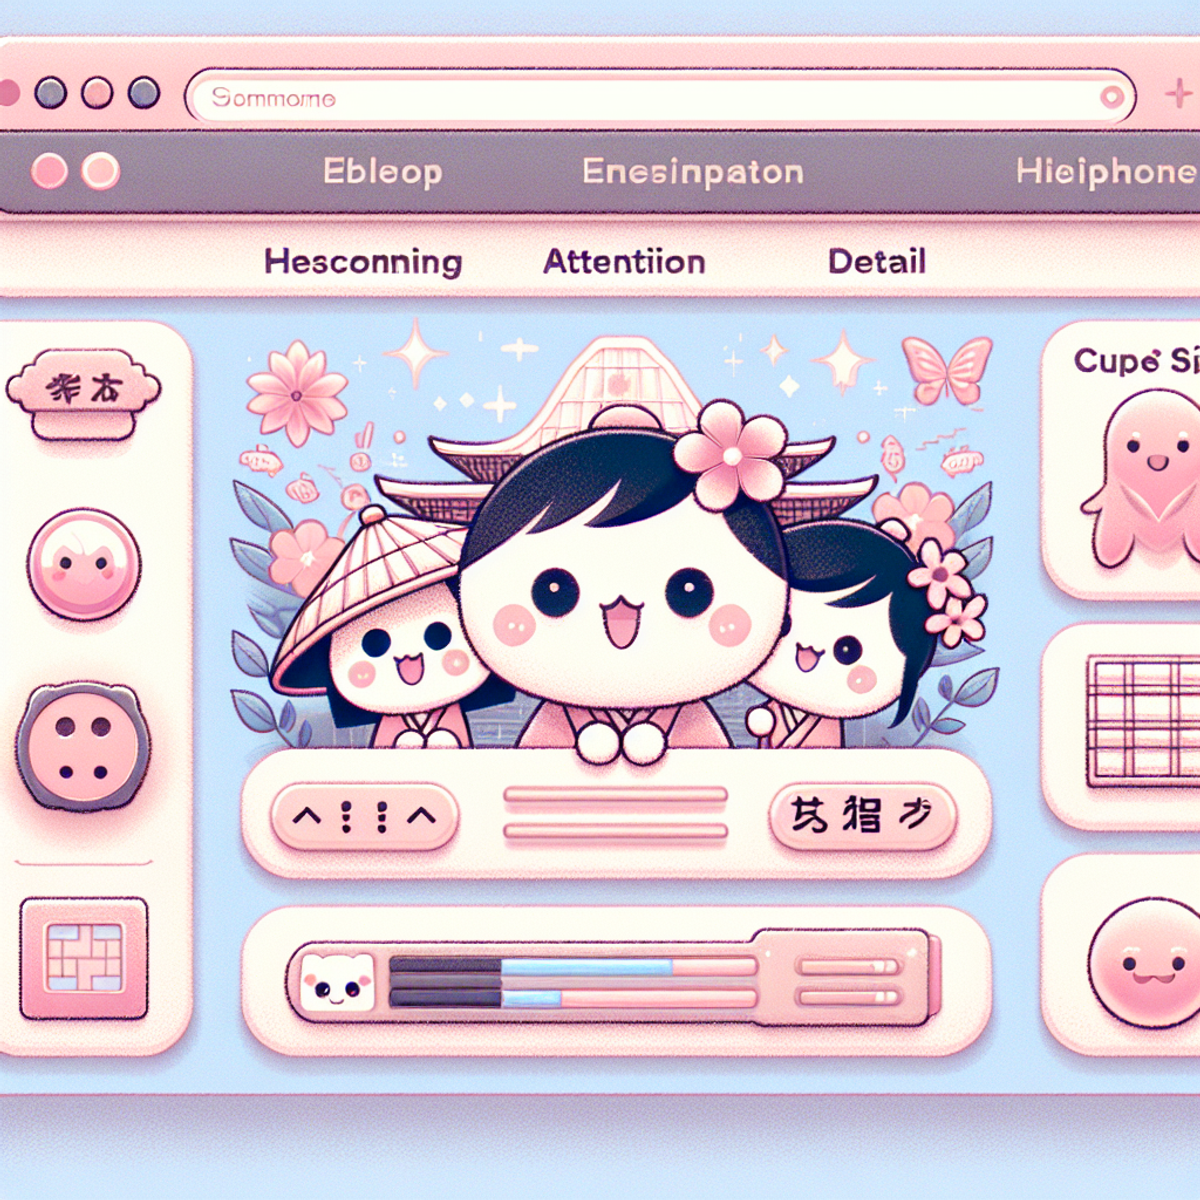 A Japanese web design illustration with soft pastel shades, cute characters, intricate buttons, emojis, and finely designed scroll bars, creating a welcoming and friendly atmosphere.